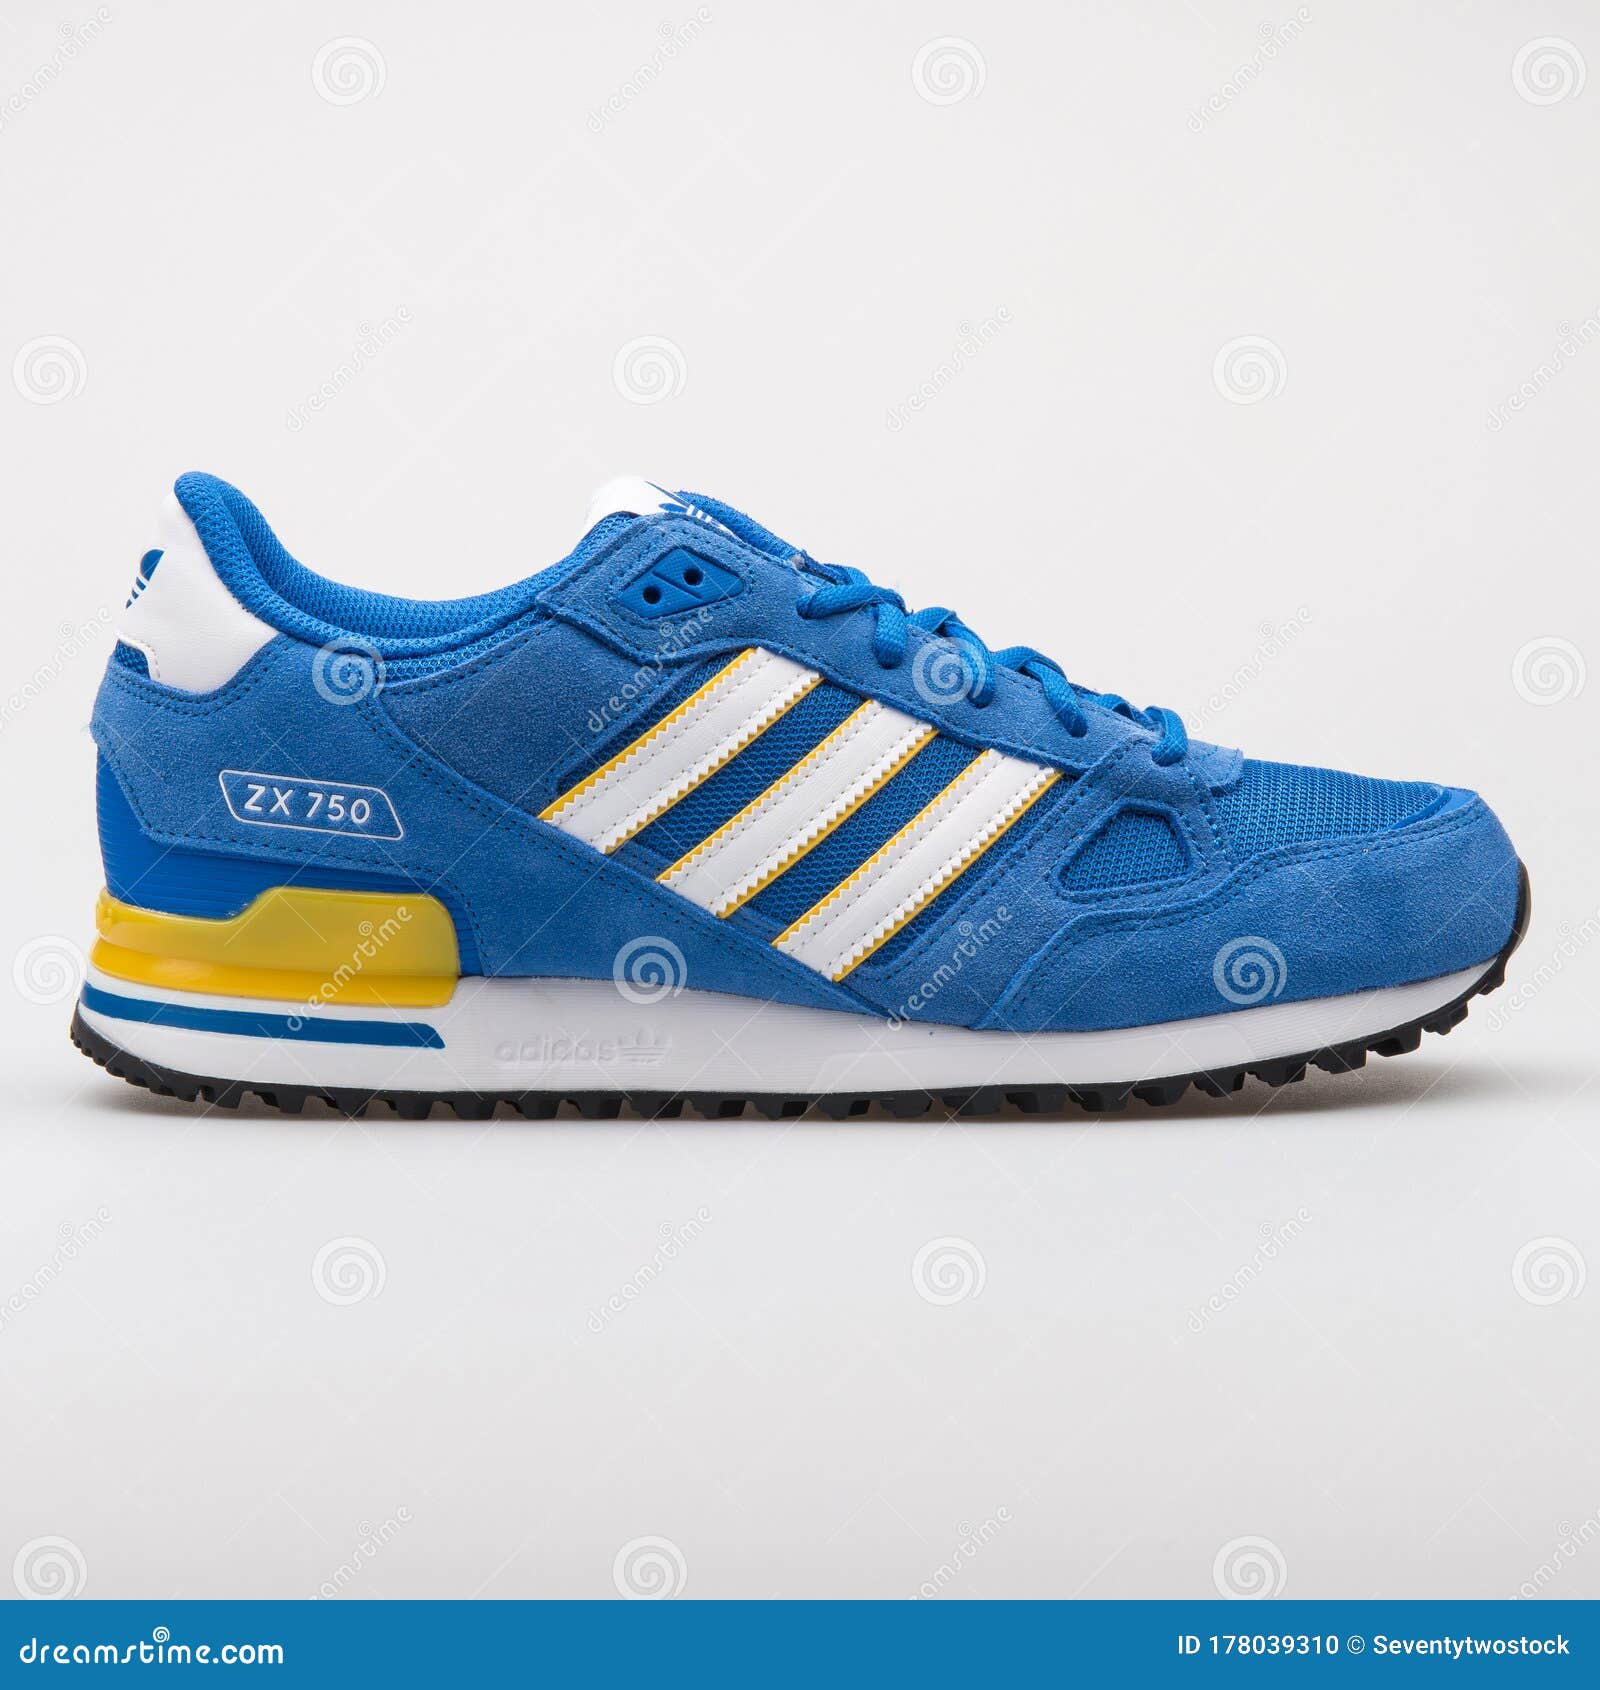 Adidas ZX 750 Blue, White and Yellow Sneaker Editorial Image - Image leather: 178039310